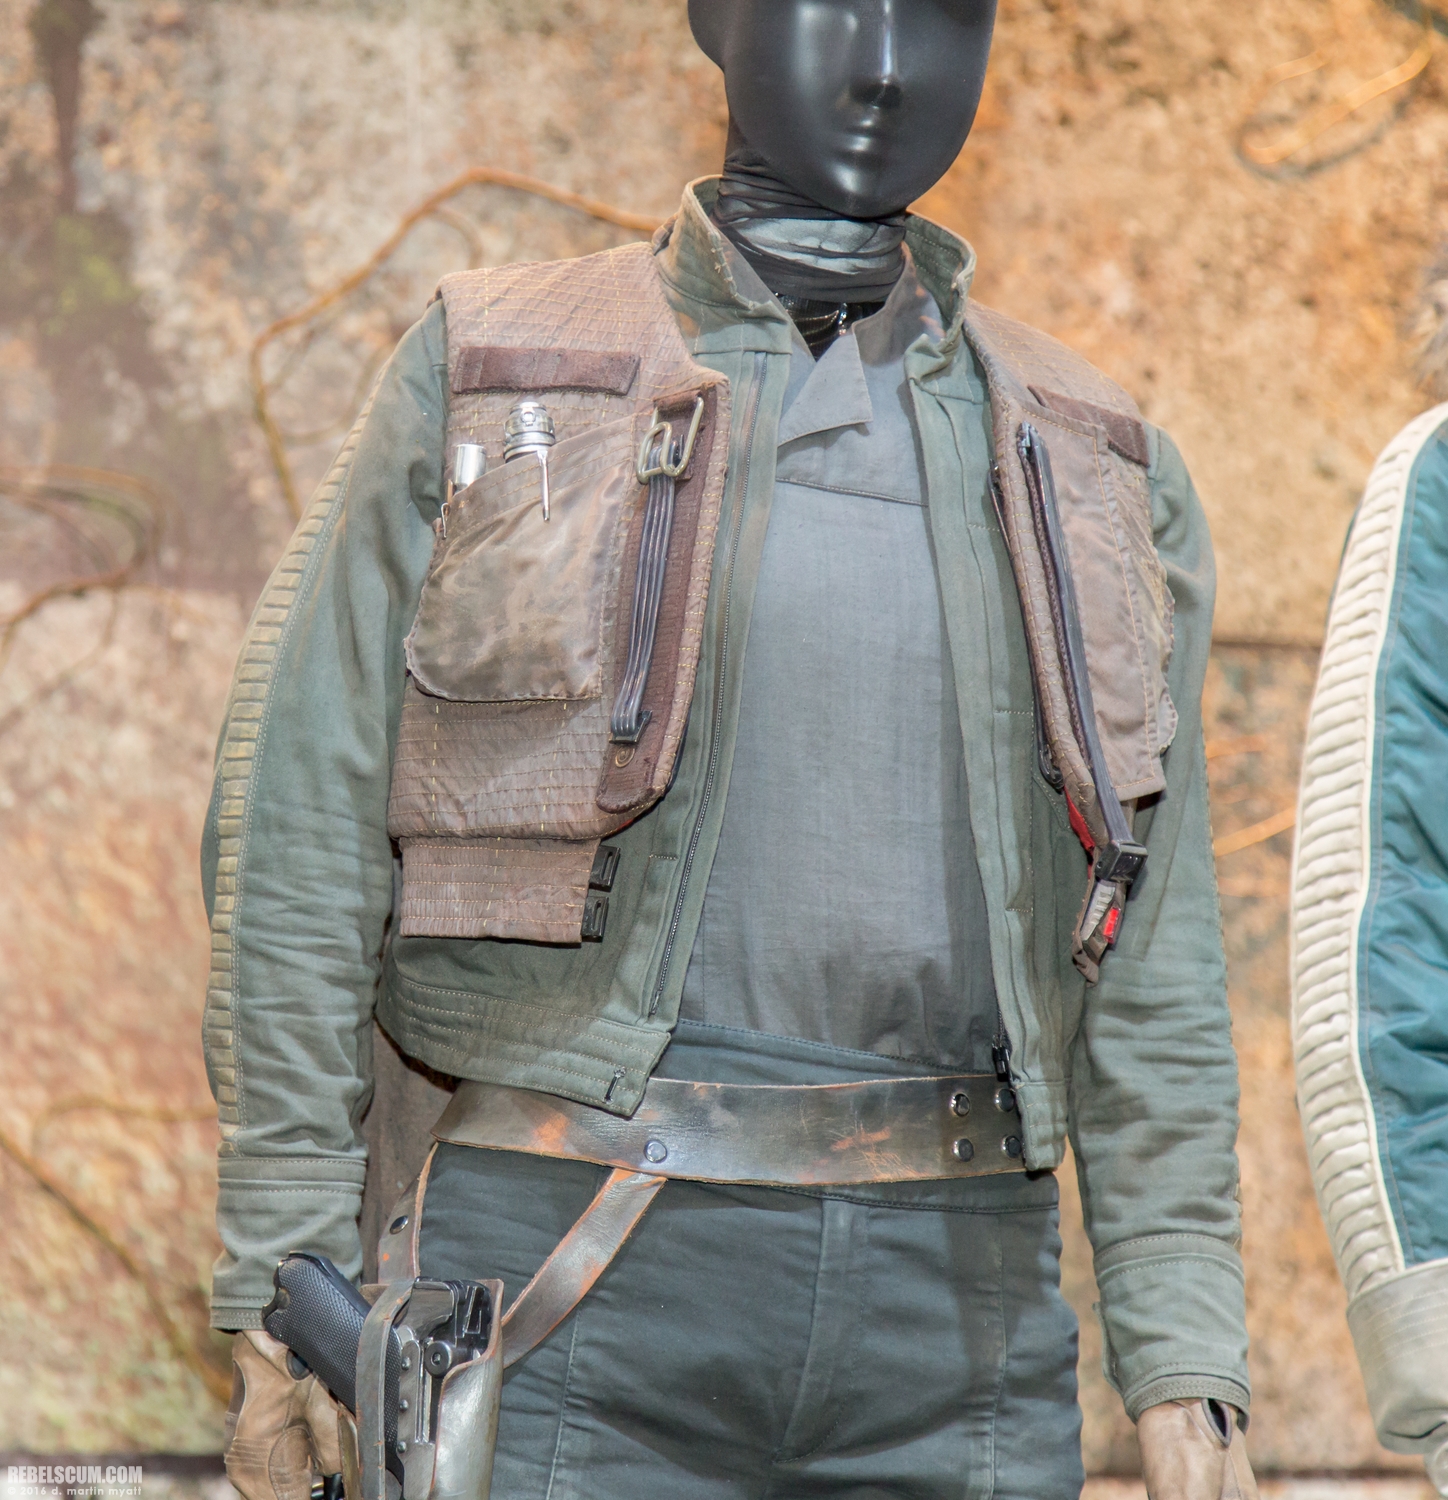 2016-SDCC-Rogue-One-costumes-019.jpg